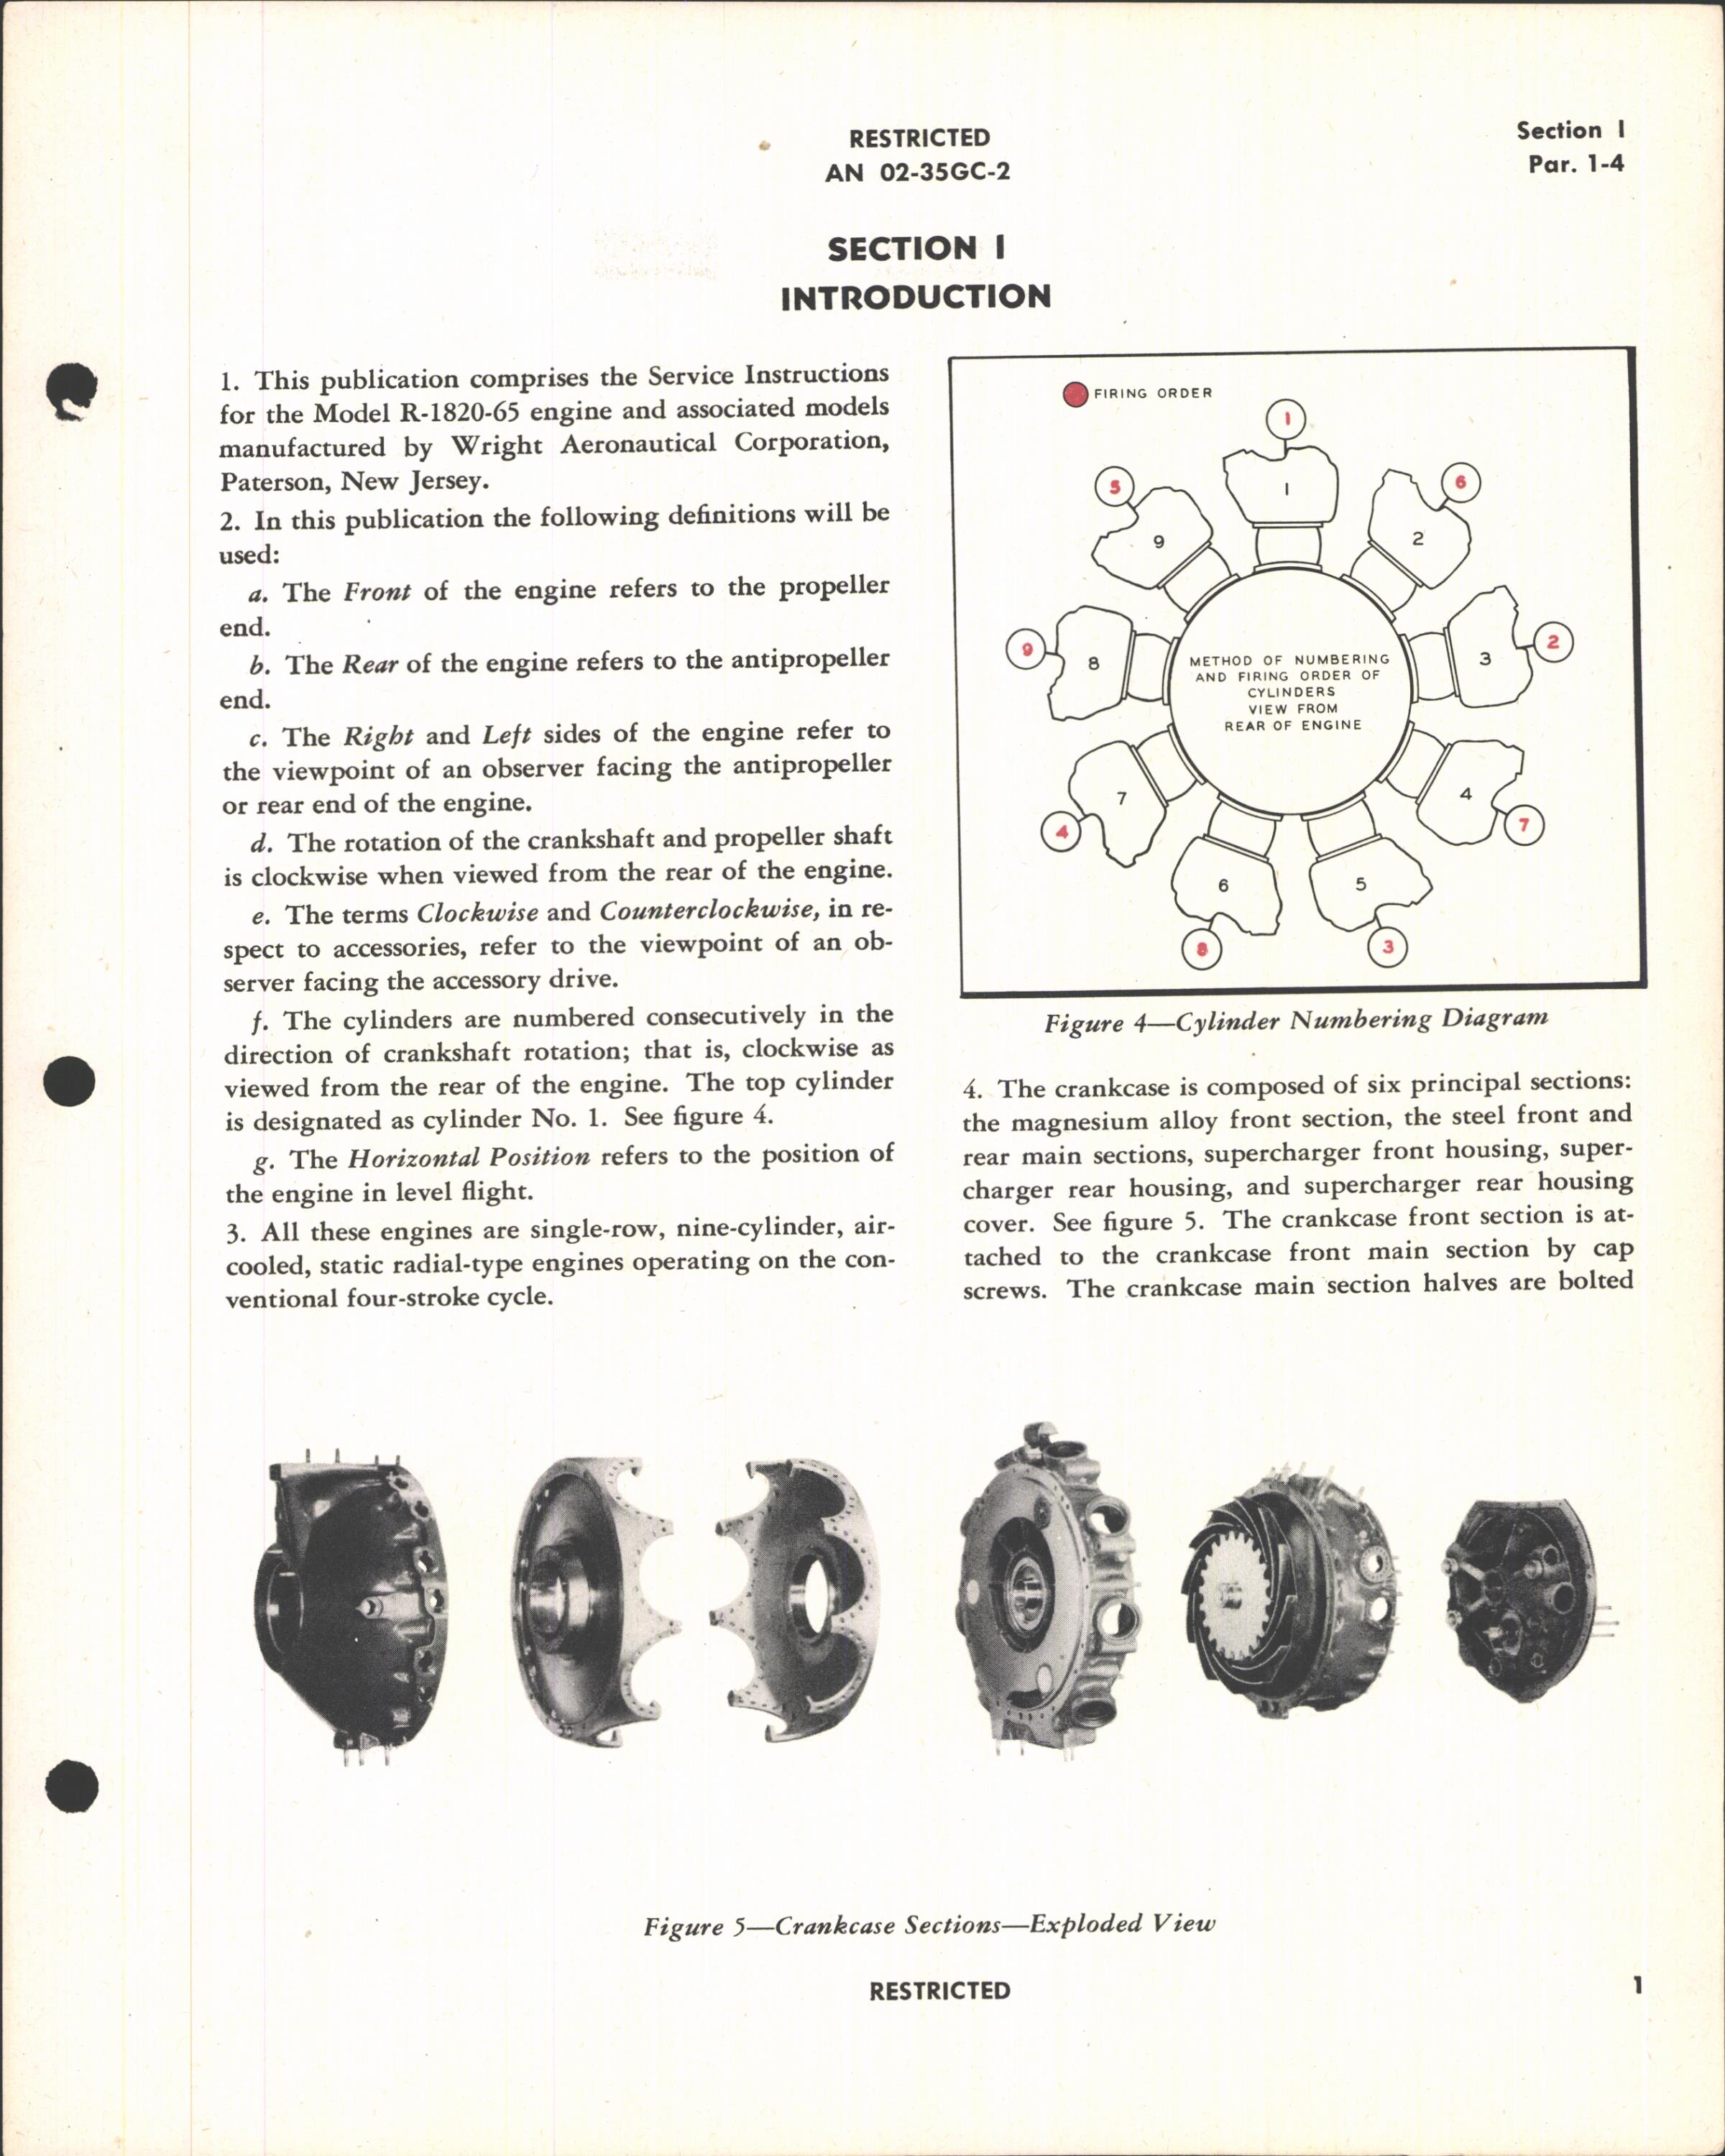 Sample page 9 from AirCorps Library document: Service Instructions for R-1820 Wright Aircraft Engines